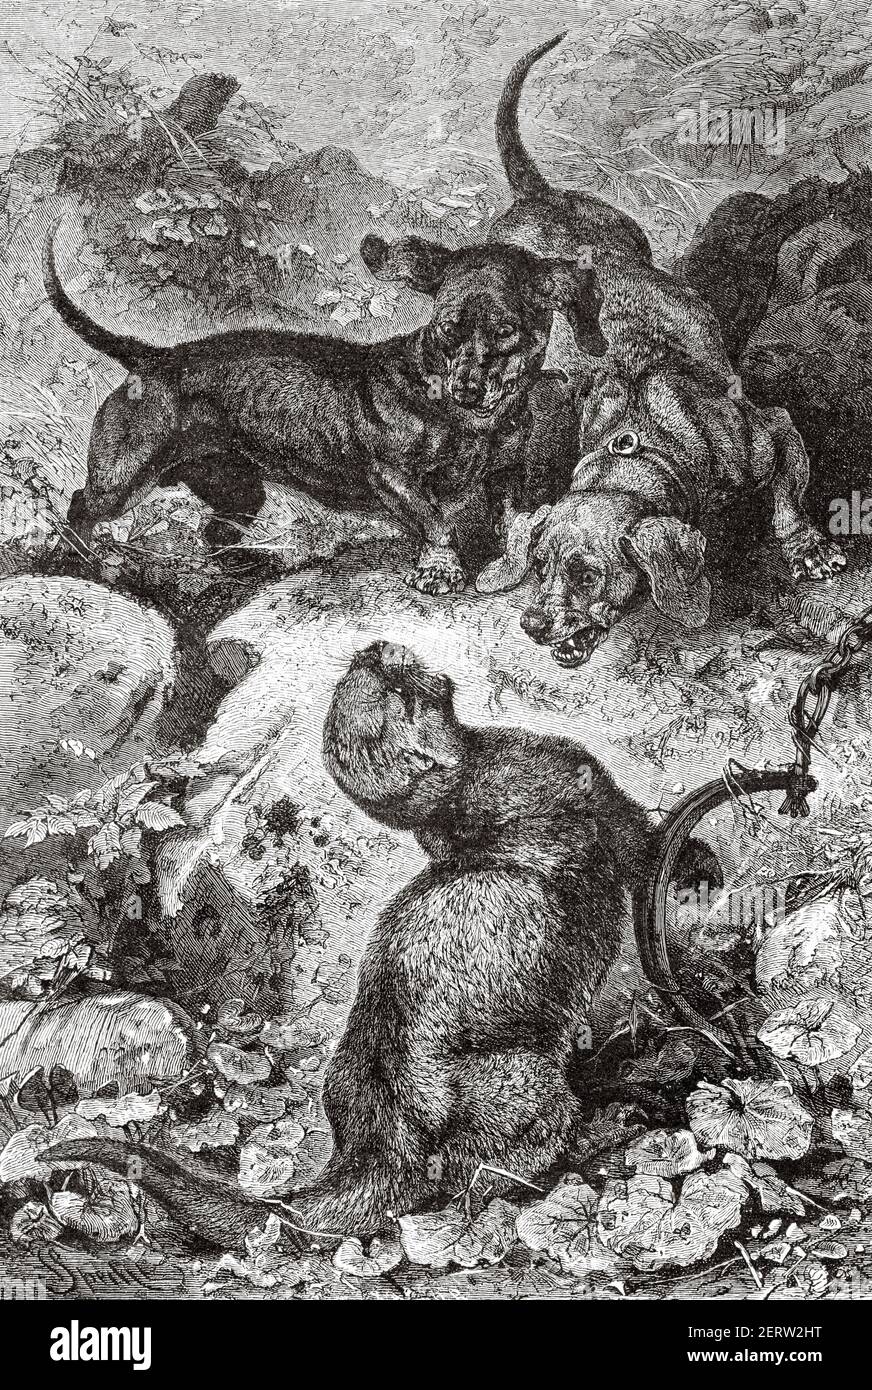 Otter caught in hunter's trap being harassed by hunting dogs. Old 19th century engraved illustration, El Mundo Ilustrado 1881 Stock Photo